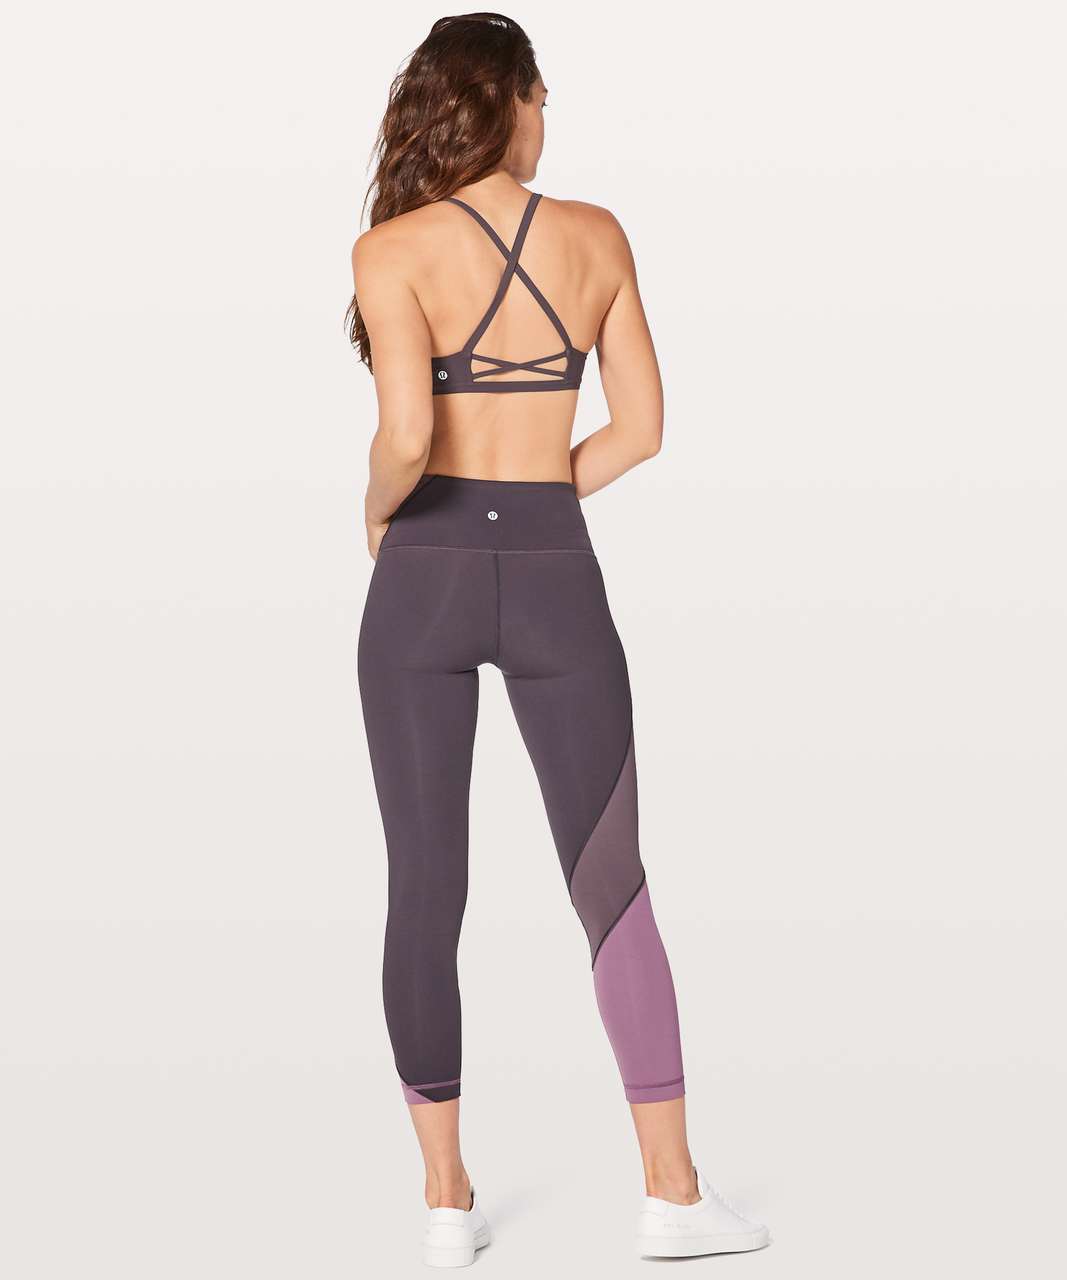 Lululemon Laced With Intent Bra - Black Currant